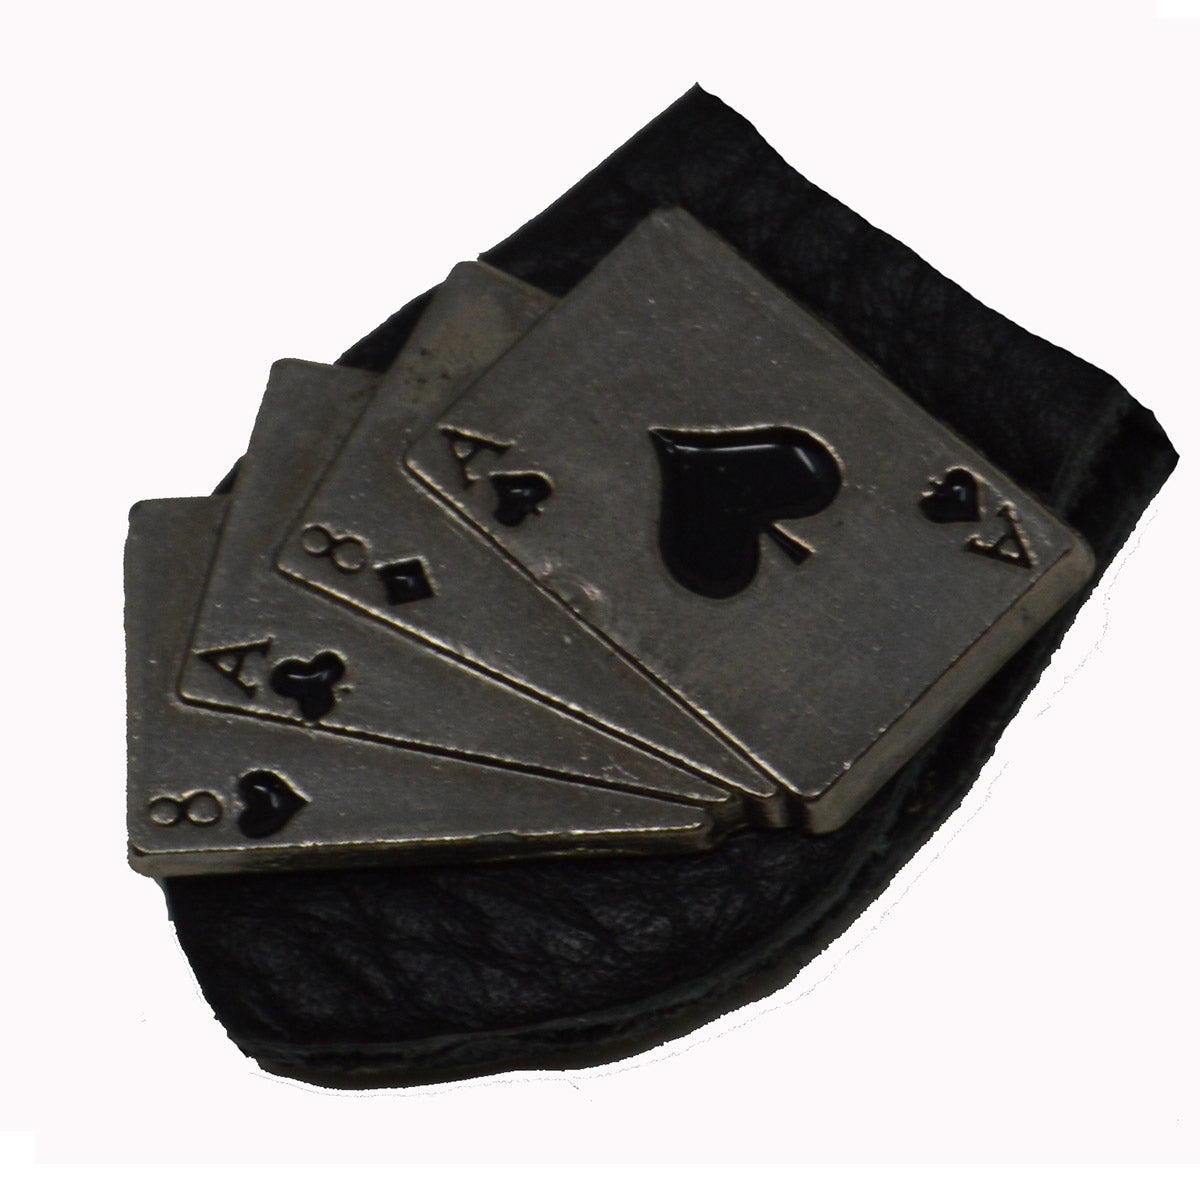 VA111 Aces and Eights Vest Extenders